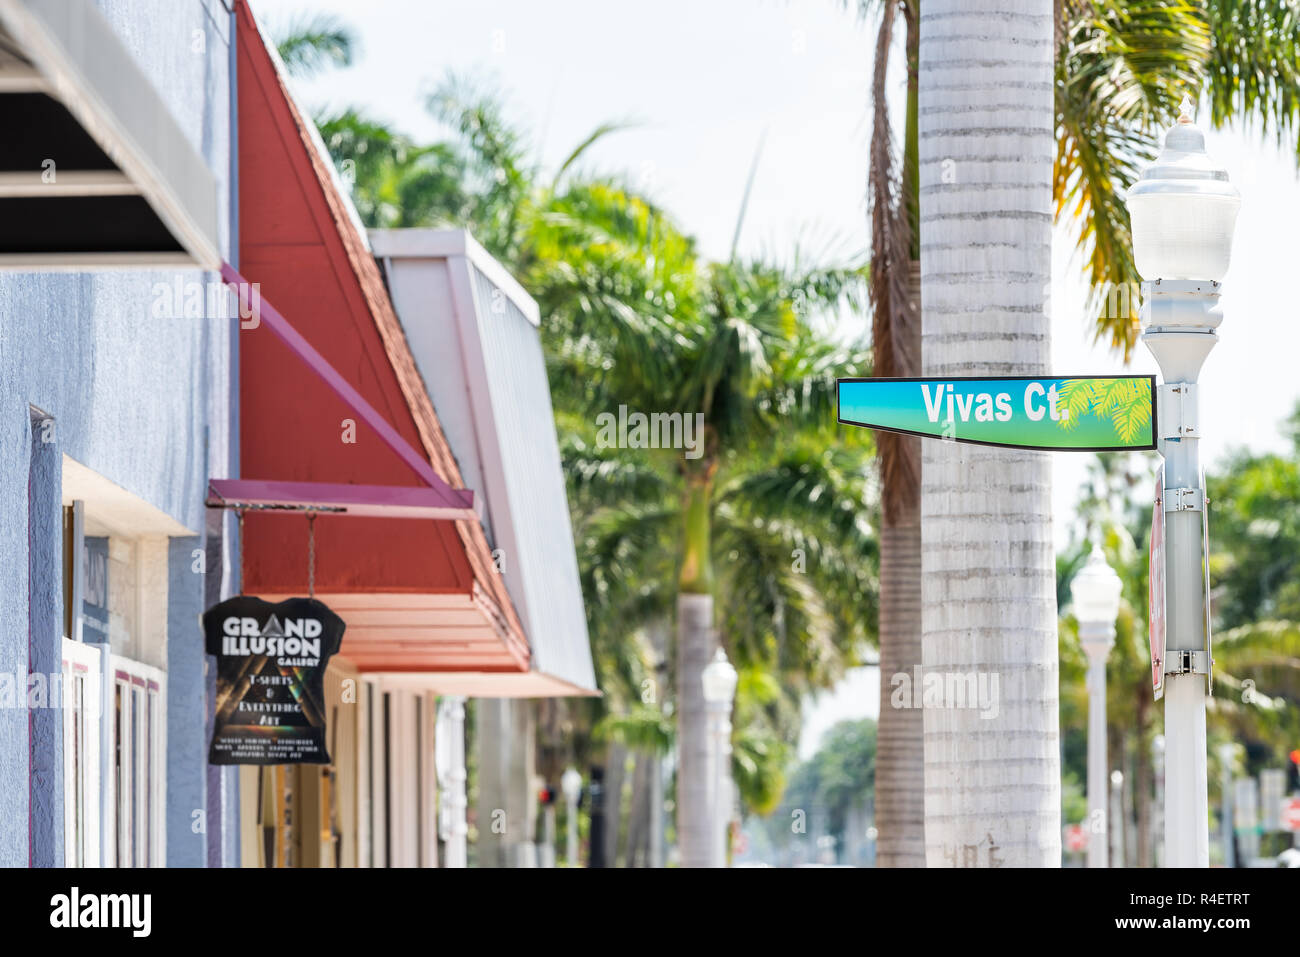 Fort Myers, USA - April 29, 2018: City town sidewalk street during sunny day in Florida gulf of mexico coast, shopping, sign for Vivas Court colorful  Stock Photo